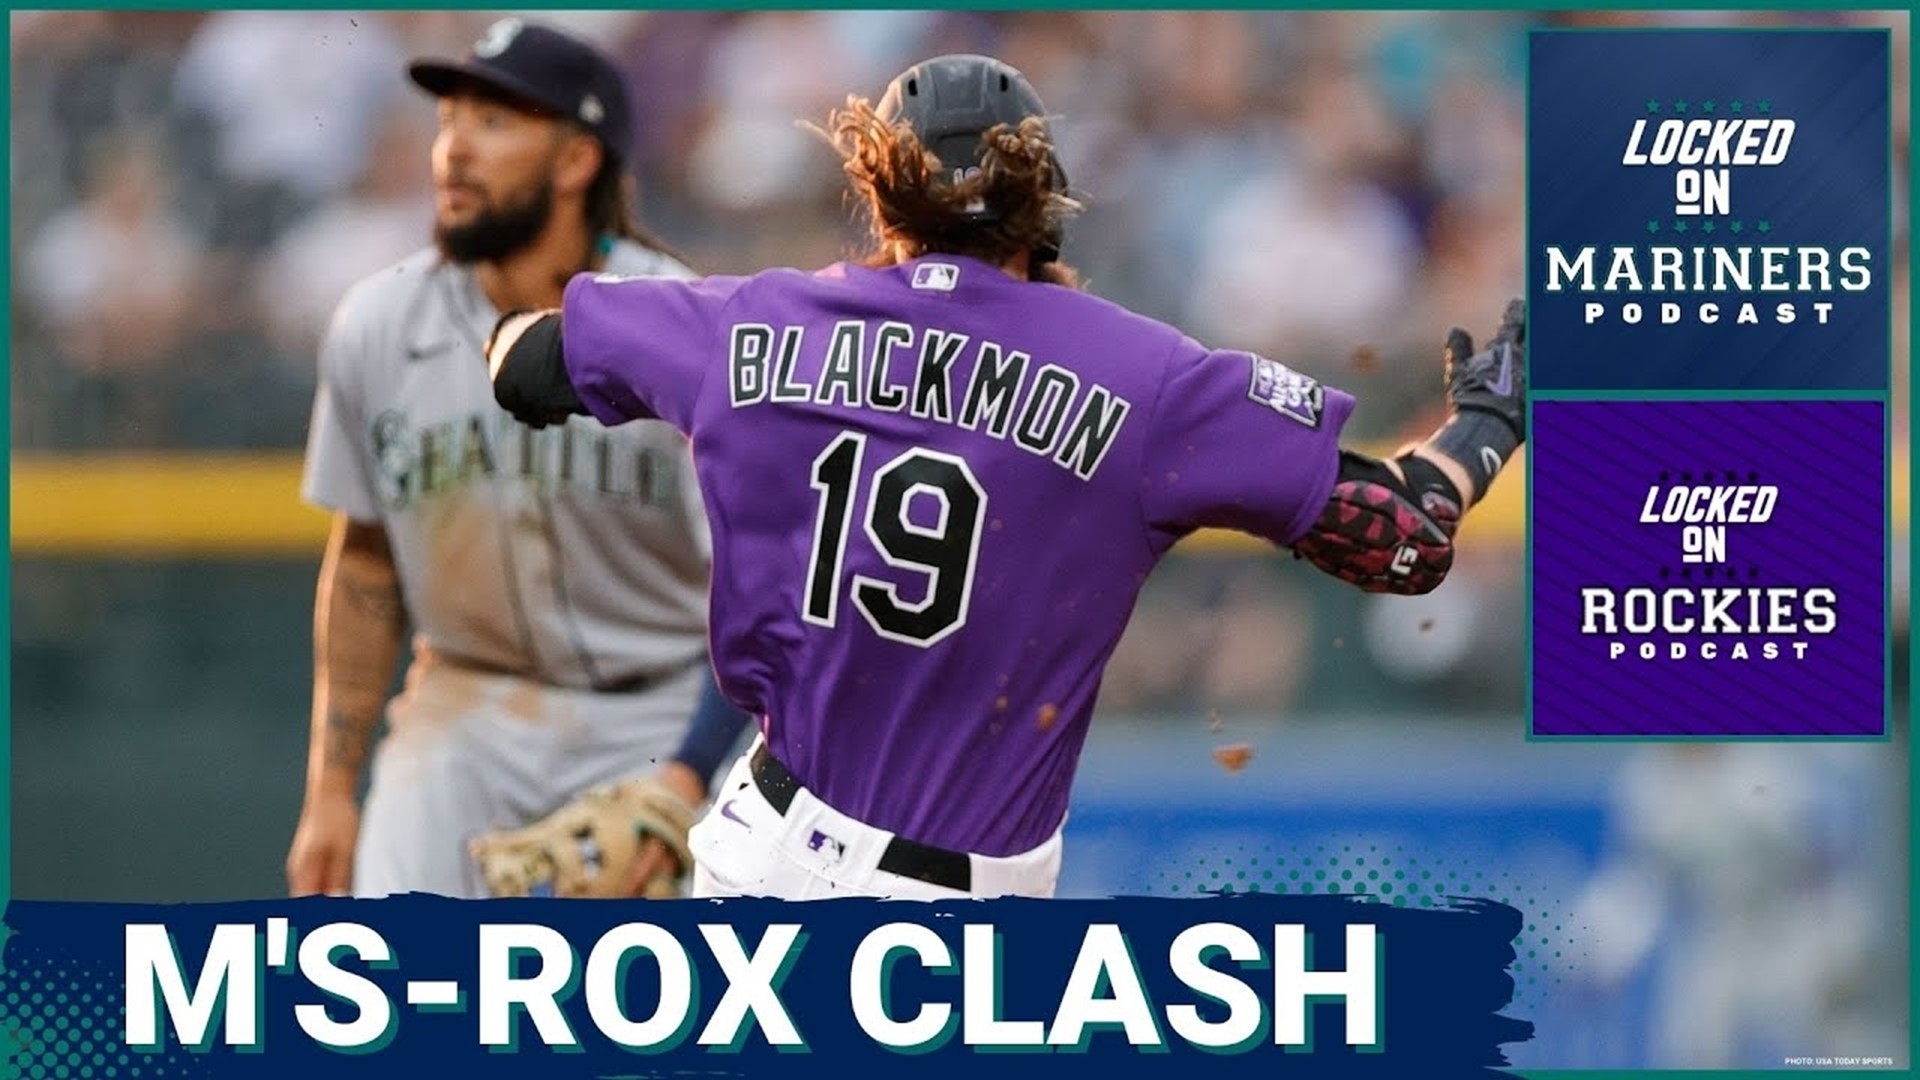 While the Rockies and Mariners head into their weekend series with one another with the same exact record of 5-8, the two teams are heading in opposite directions.